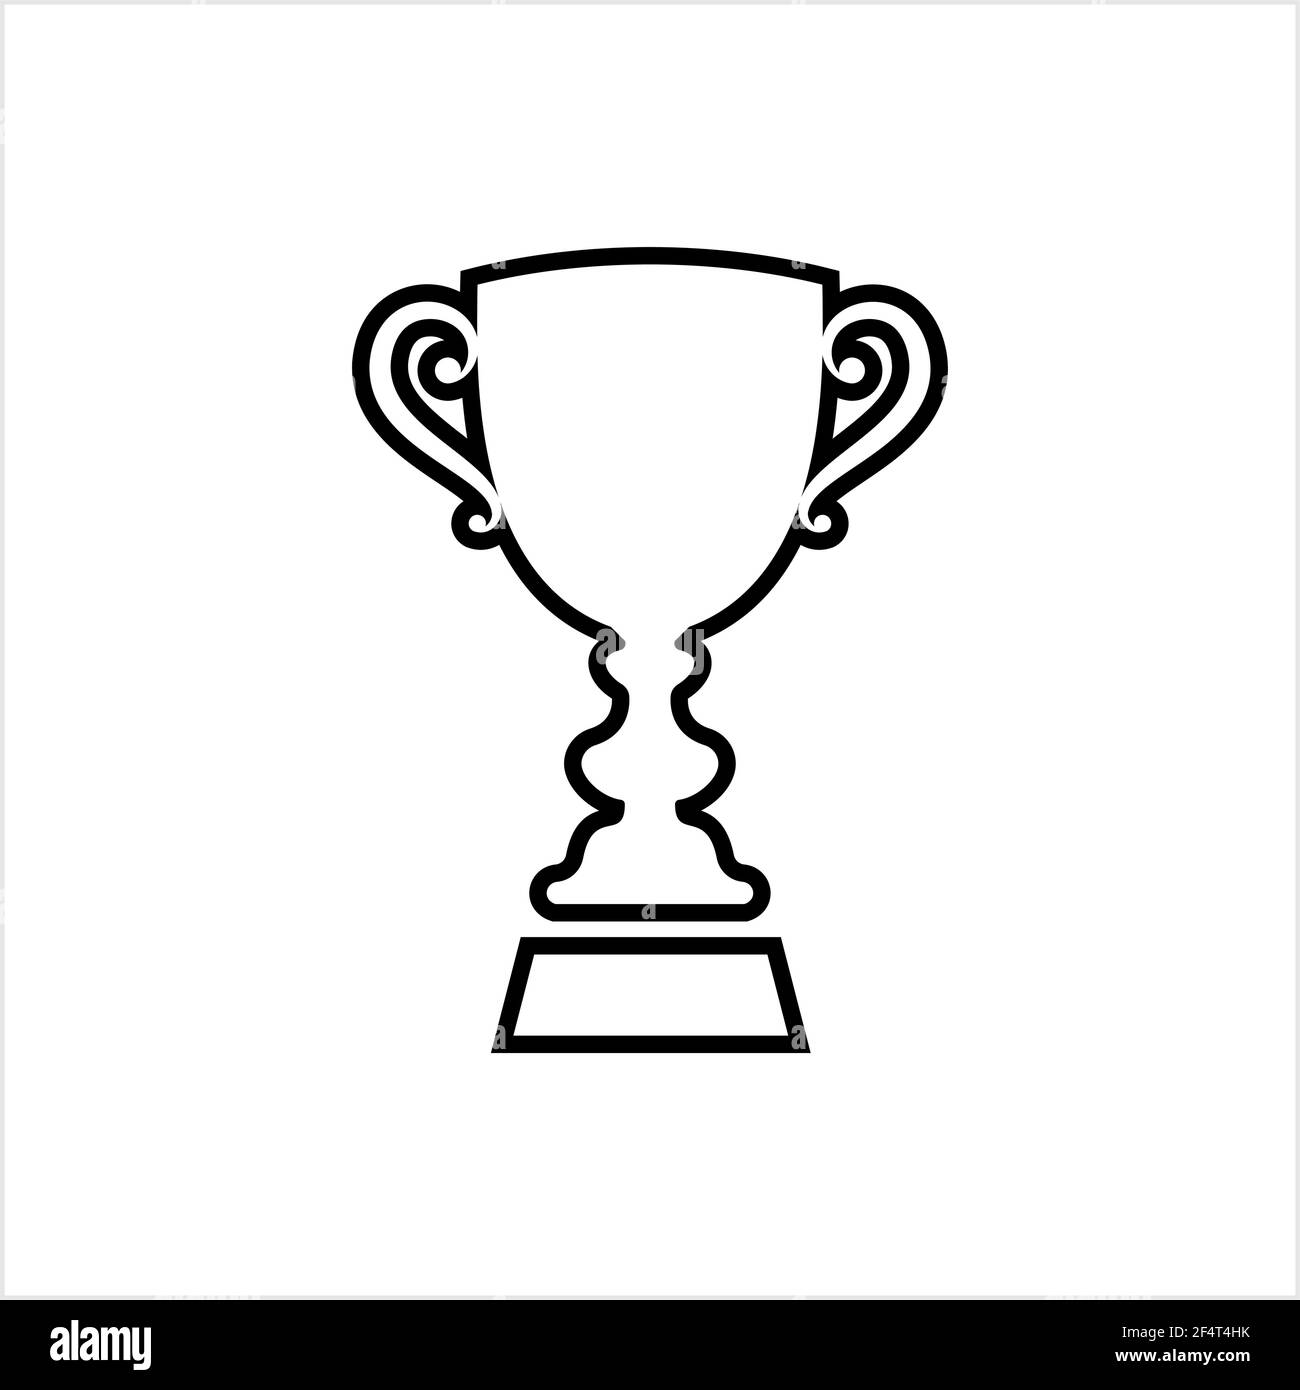 Champion clip art Black and White Stock Photos & Images - Alamy